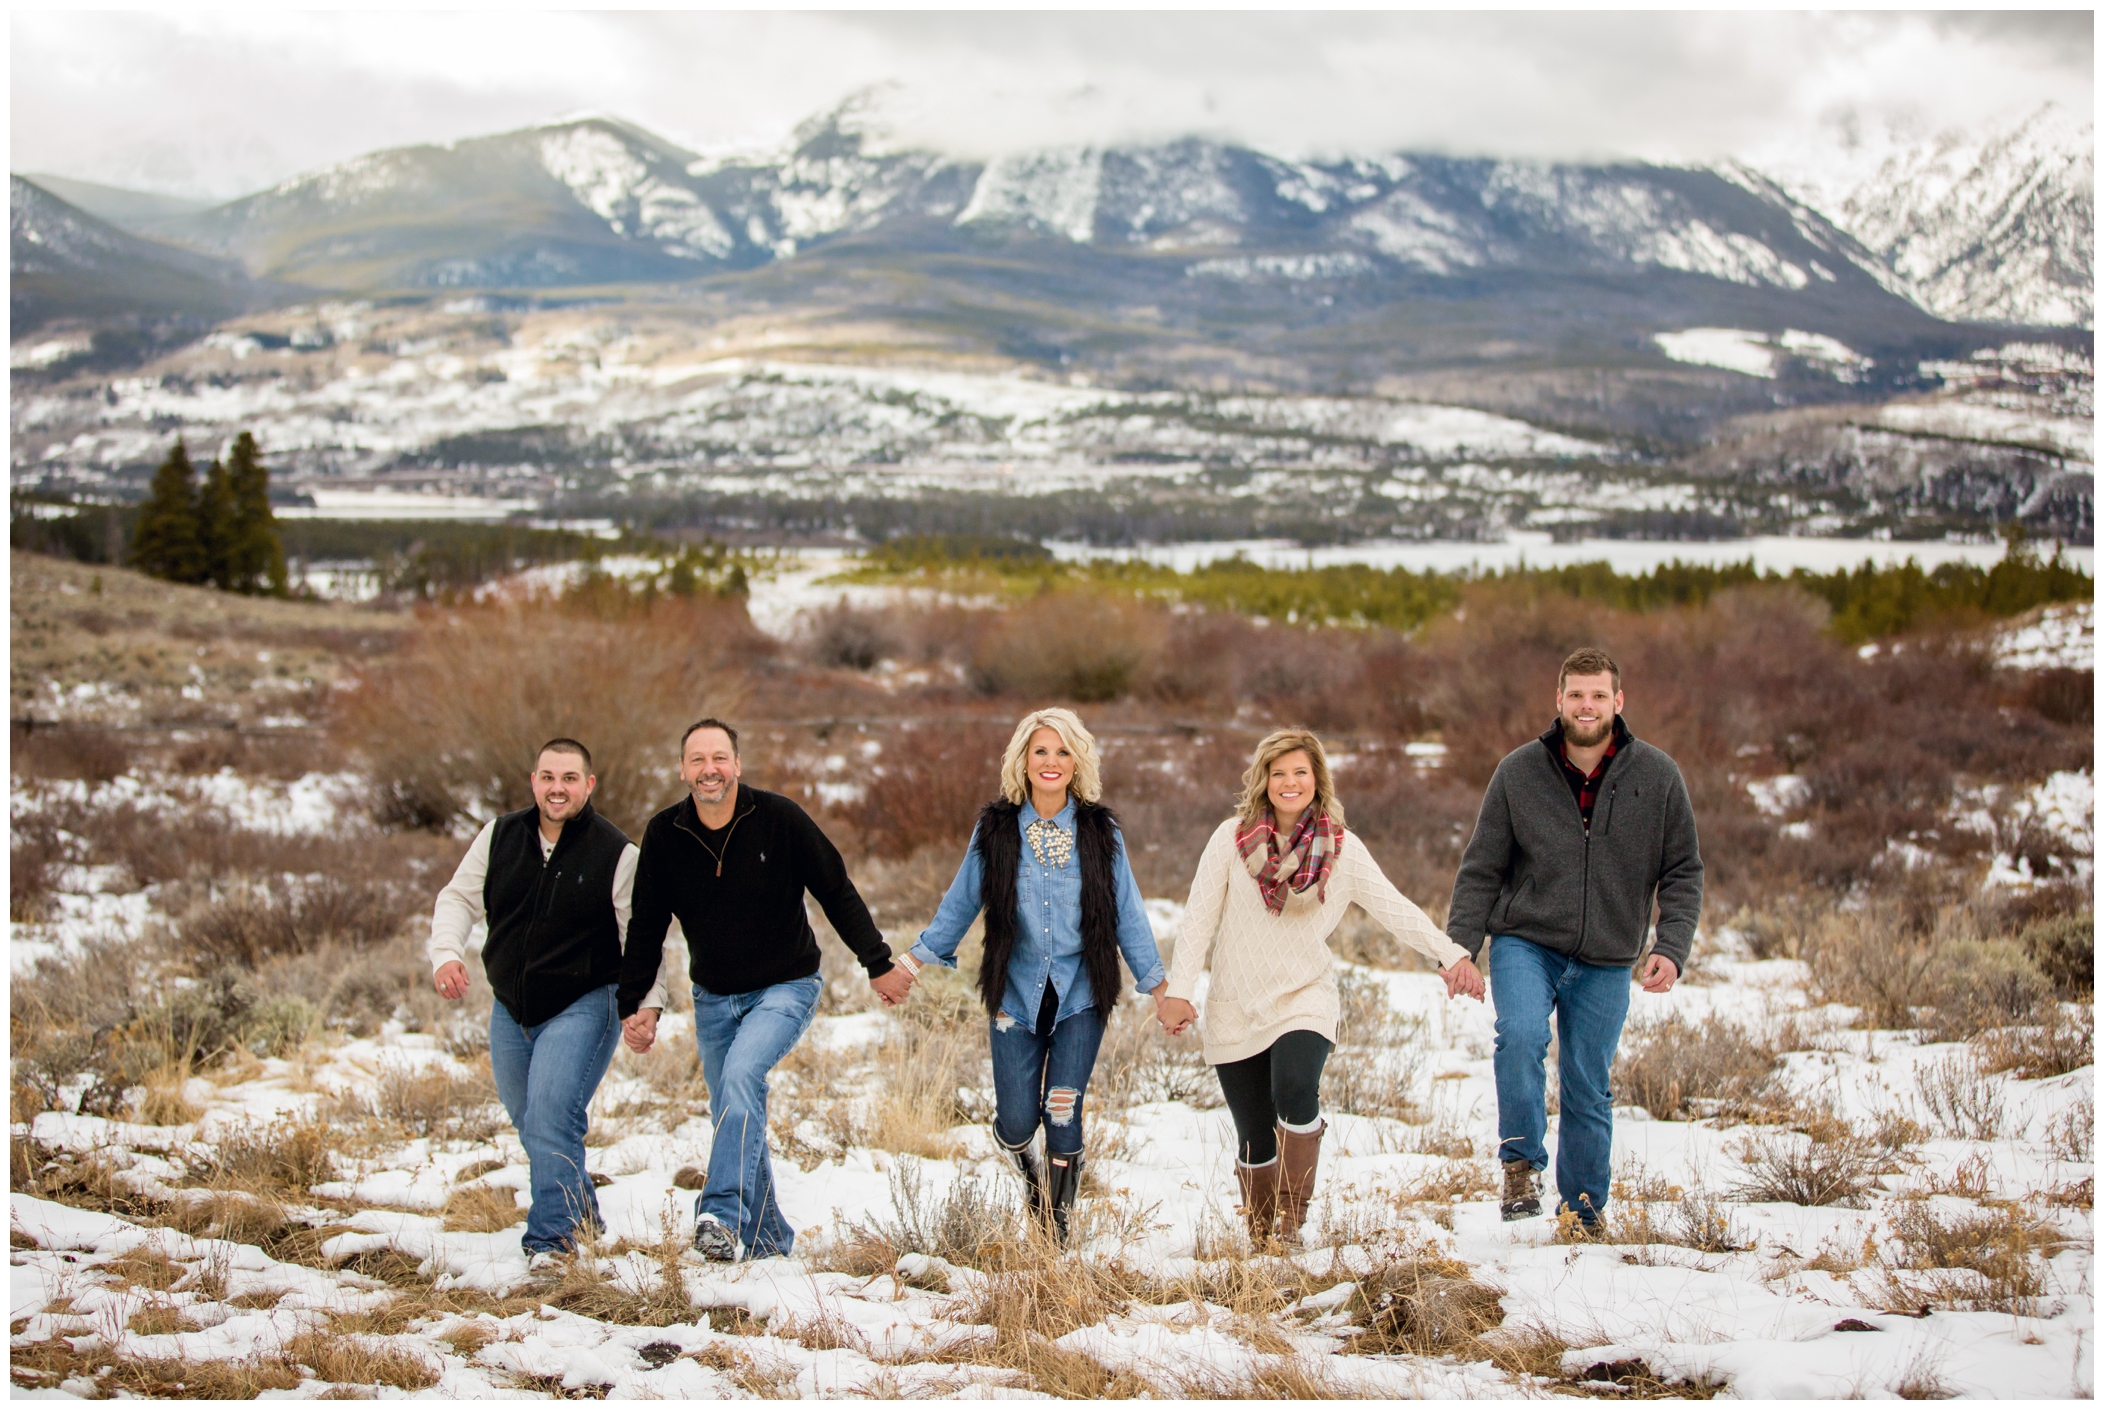 Snowy Sapphire Point photos captured by Colorado award-winning Breckenridge family photographers Plum Pretty Photography in the mountains during winter.